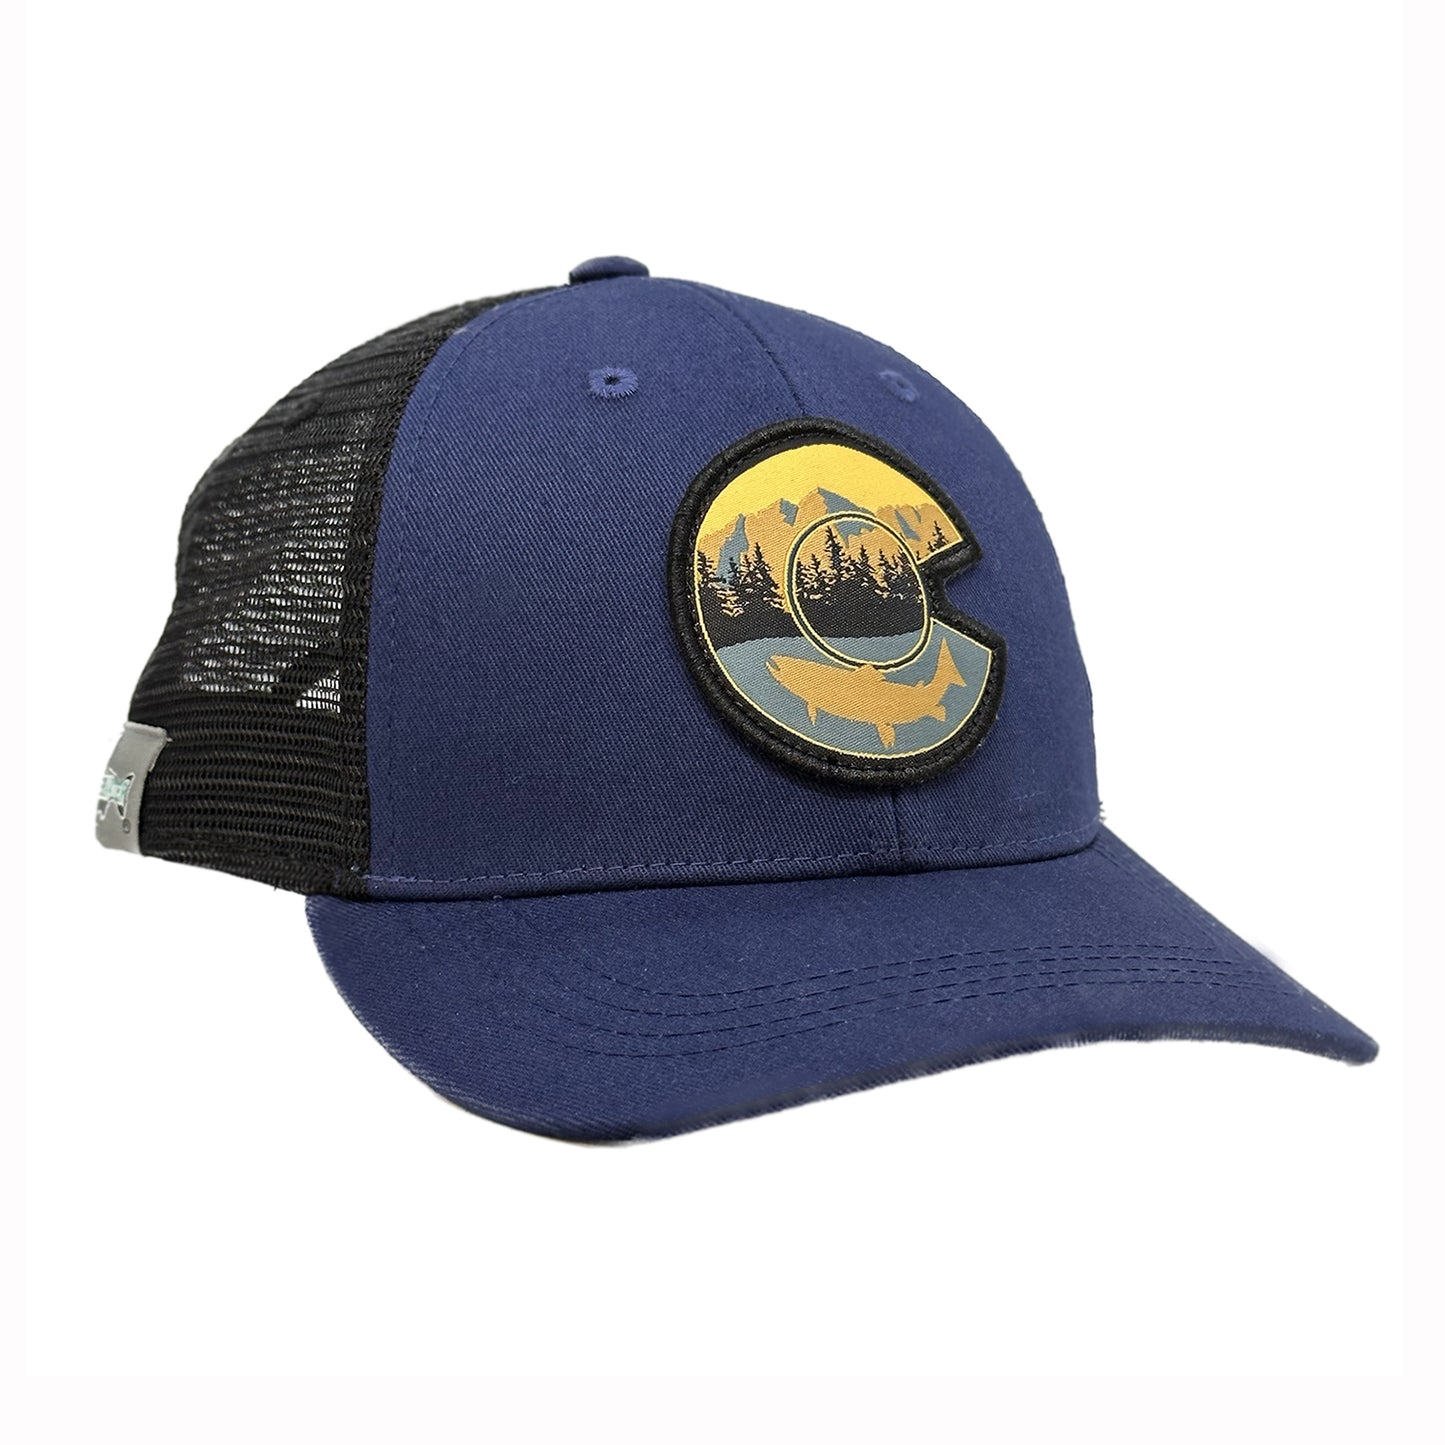 Navy hat with black mesh back with a Colorado C logo patch with a fish, tree line in mountains within